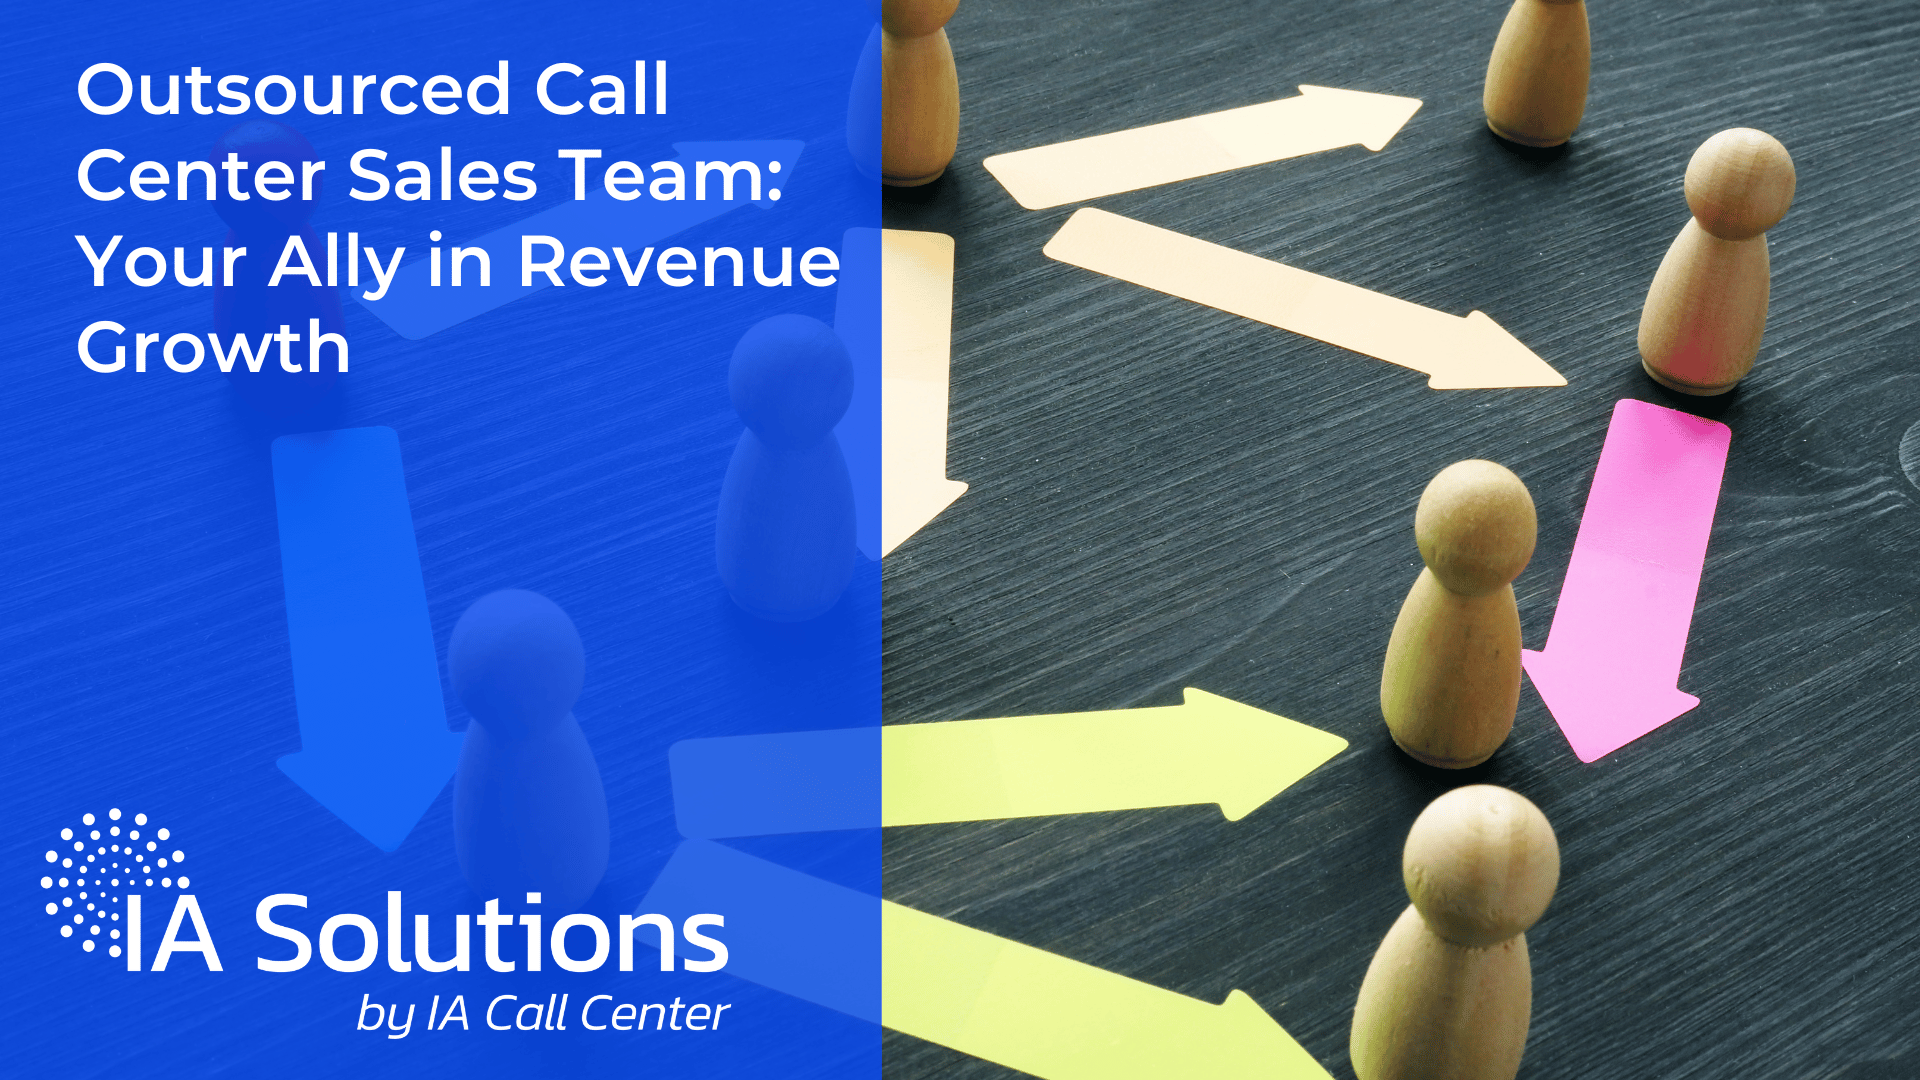 Outsourced Call Center Sales Team Your Ally in Revenue Growth